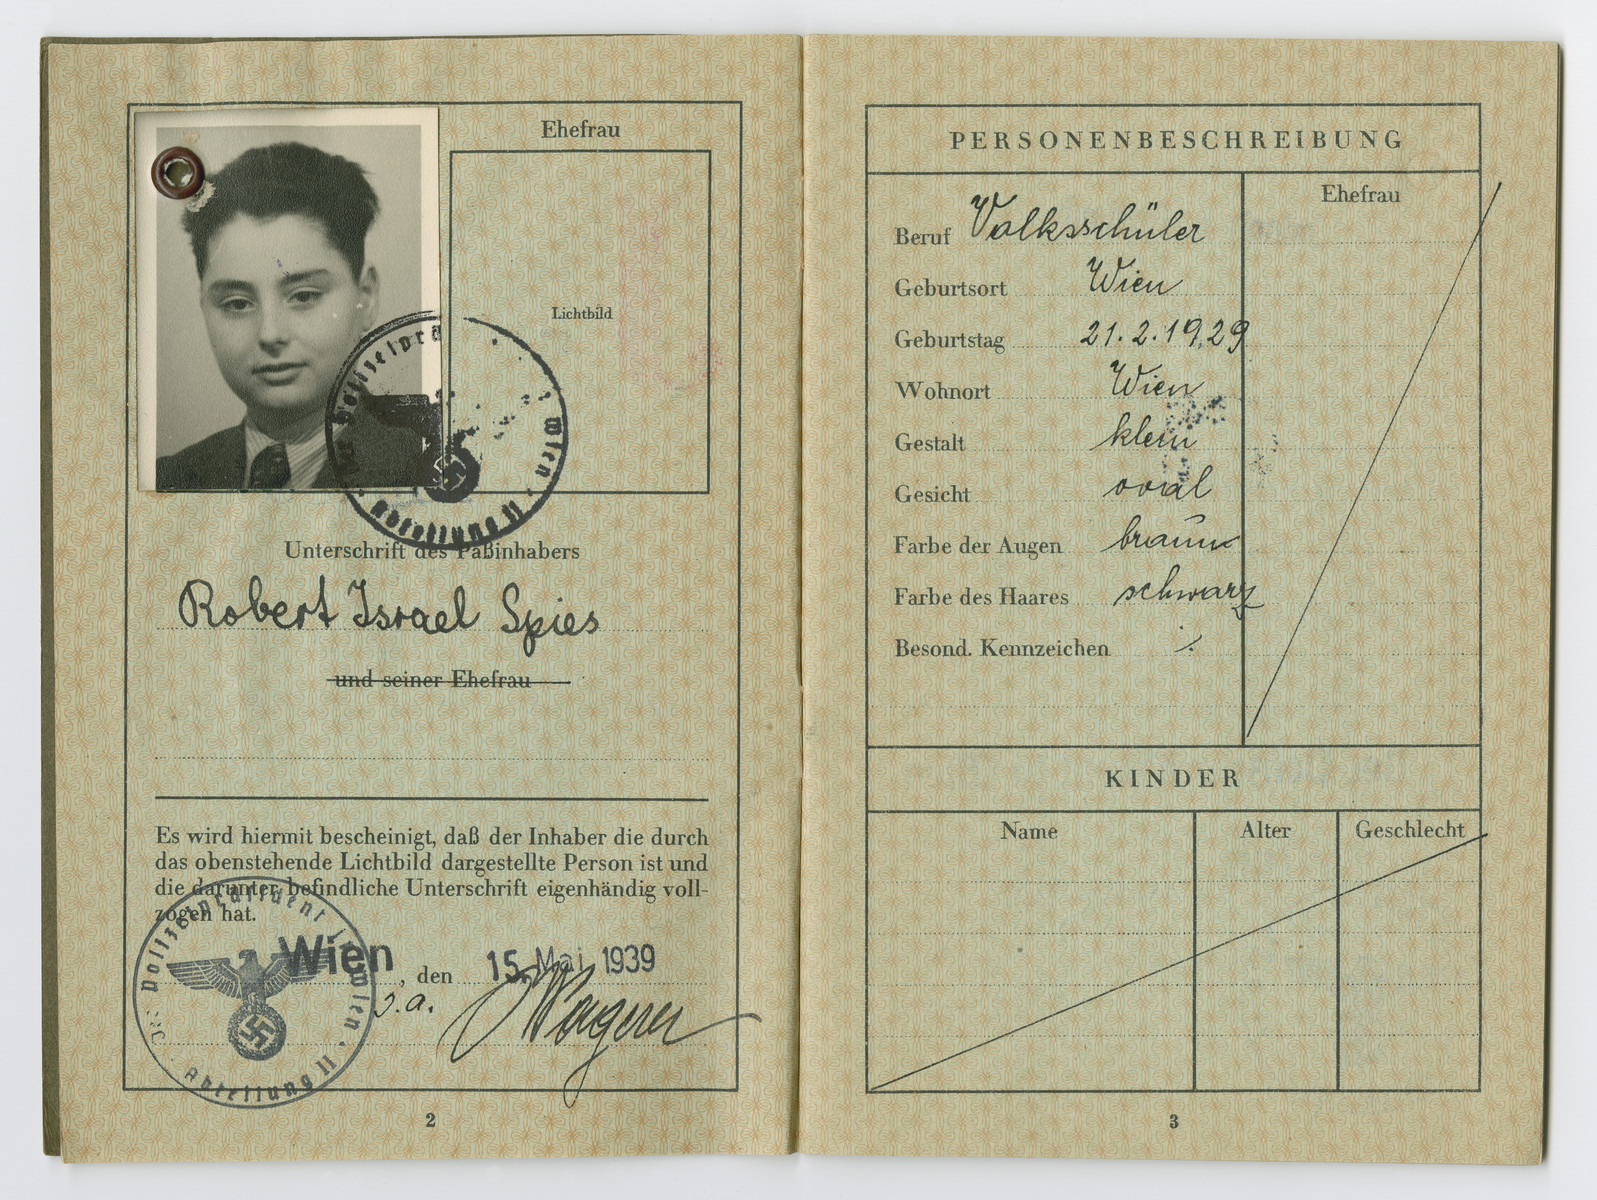 Identification papers issued to Robert Israel Spies stating he was born in Vienna on February 2, 1929.

Israel was not his real middle name, but on August 17, 1938 Nazi officials ordered that all Jewish men assume the middle name Israel, and all Jewish women take the middle name Sara.